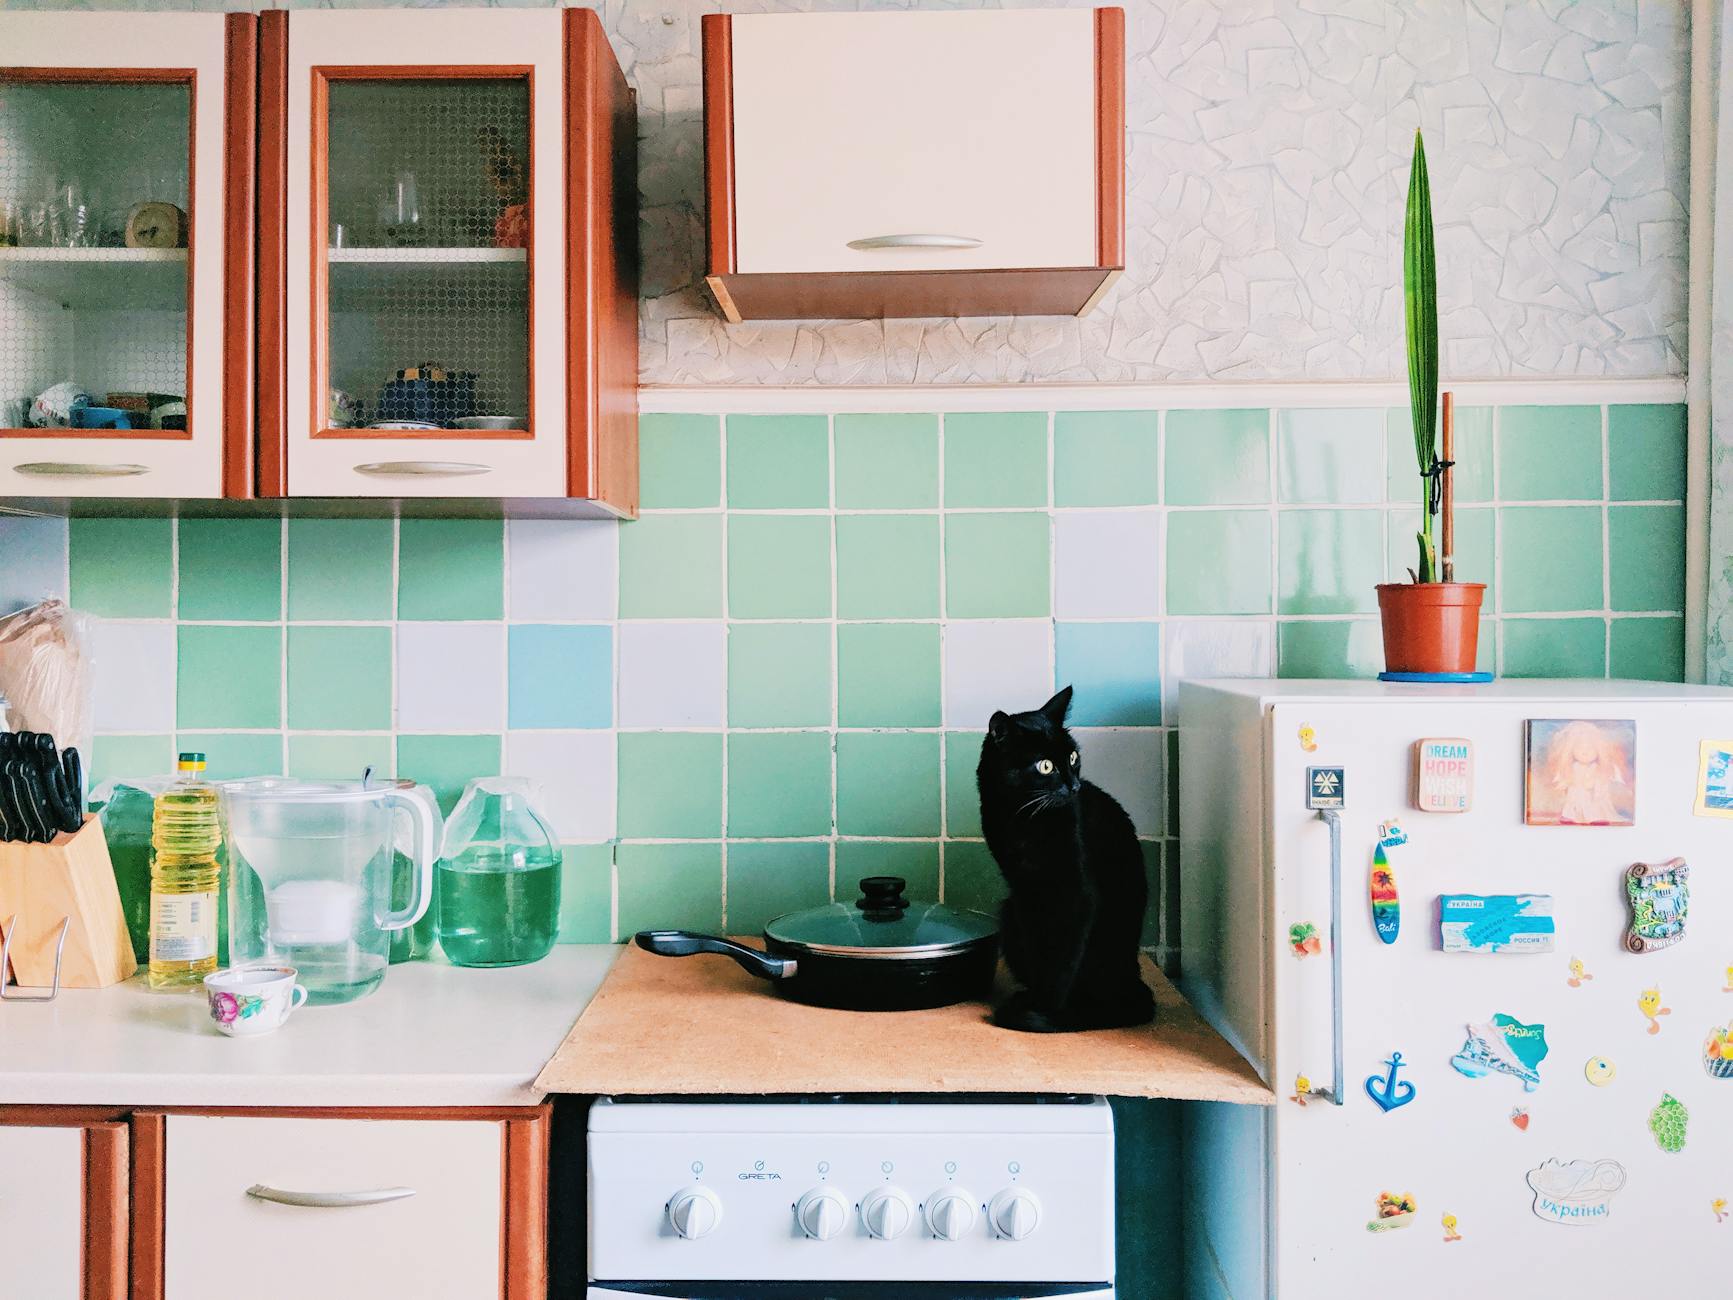 Cat sitting on stove in kitchen with cupboards